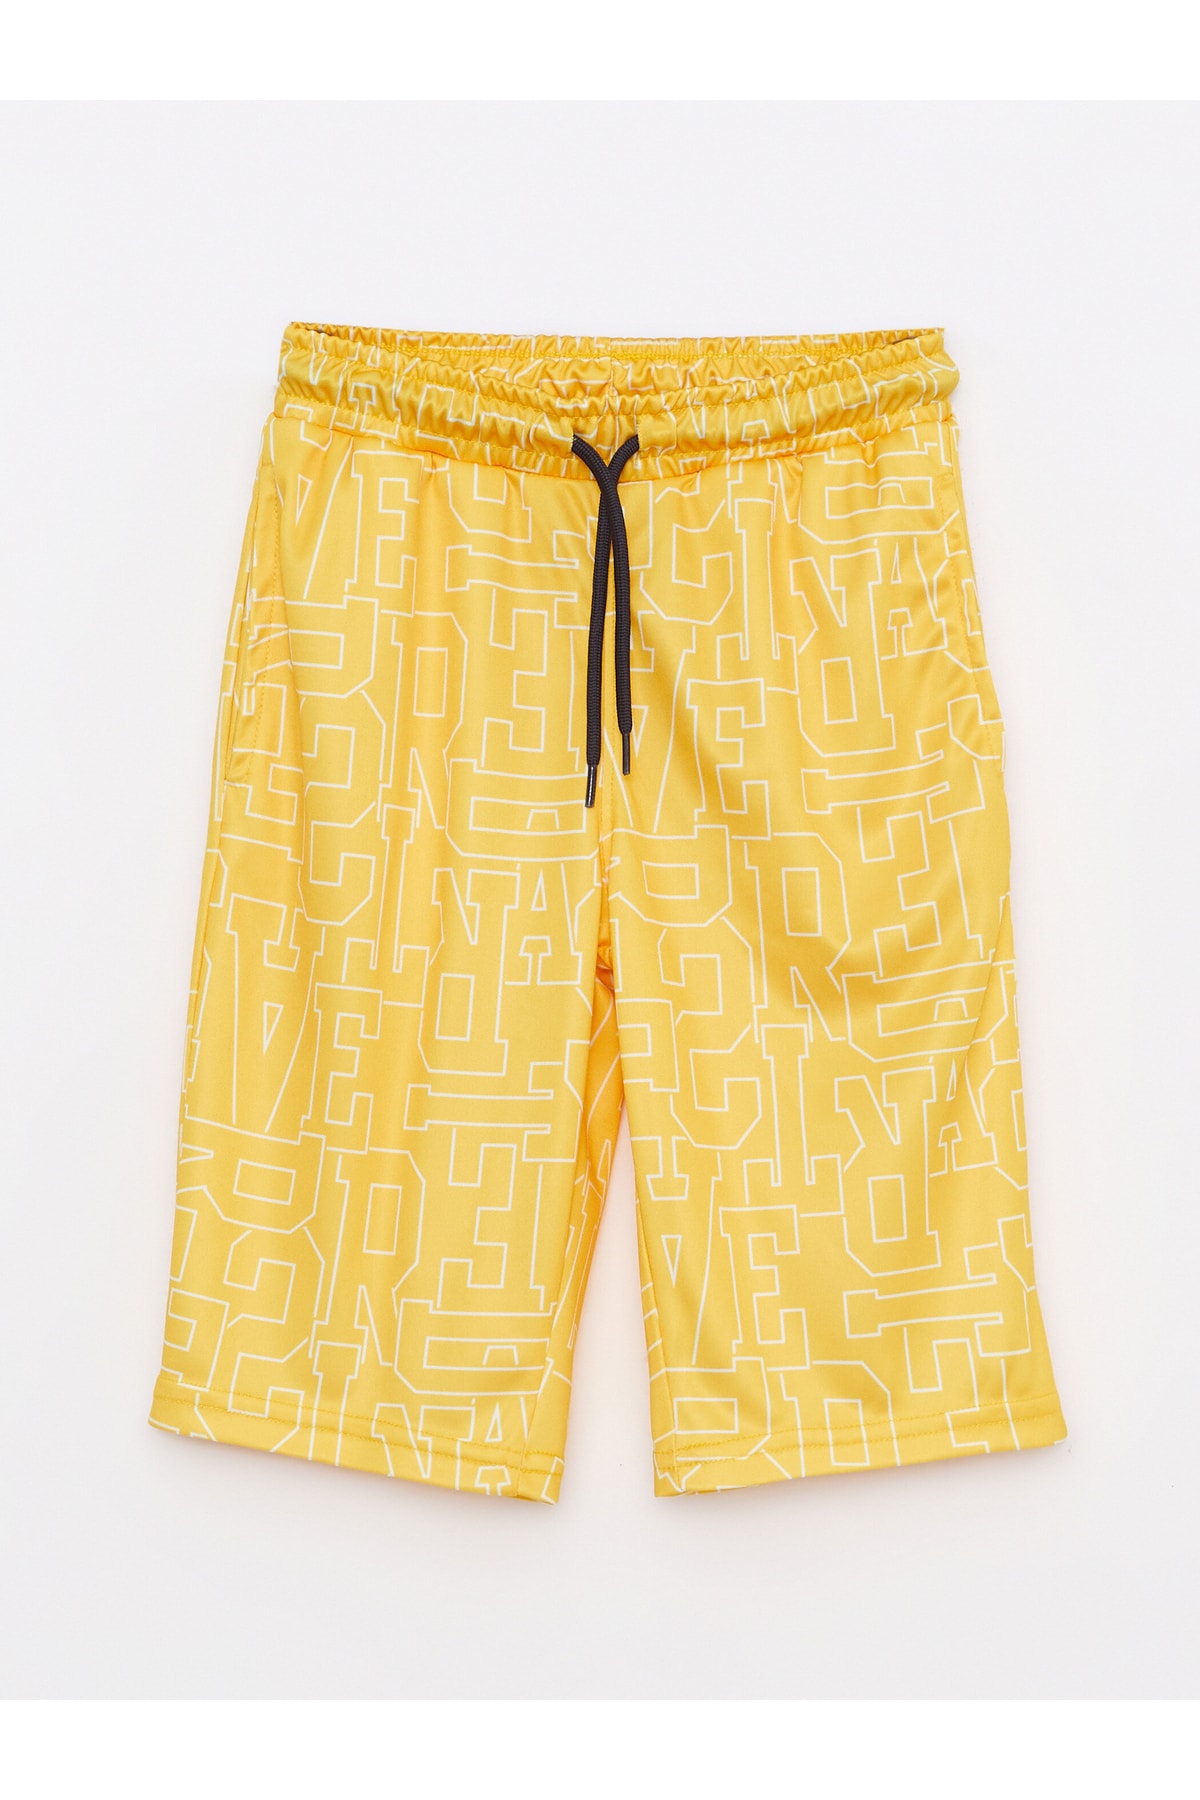 LC Waikiki Boys Roller Roller With An Elastic Printed Waist